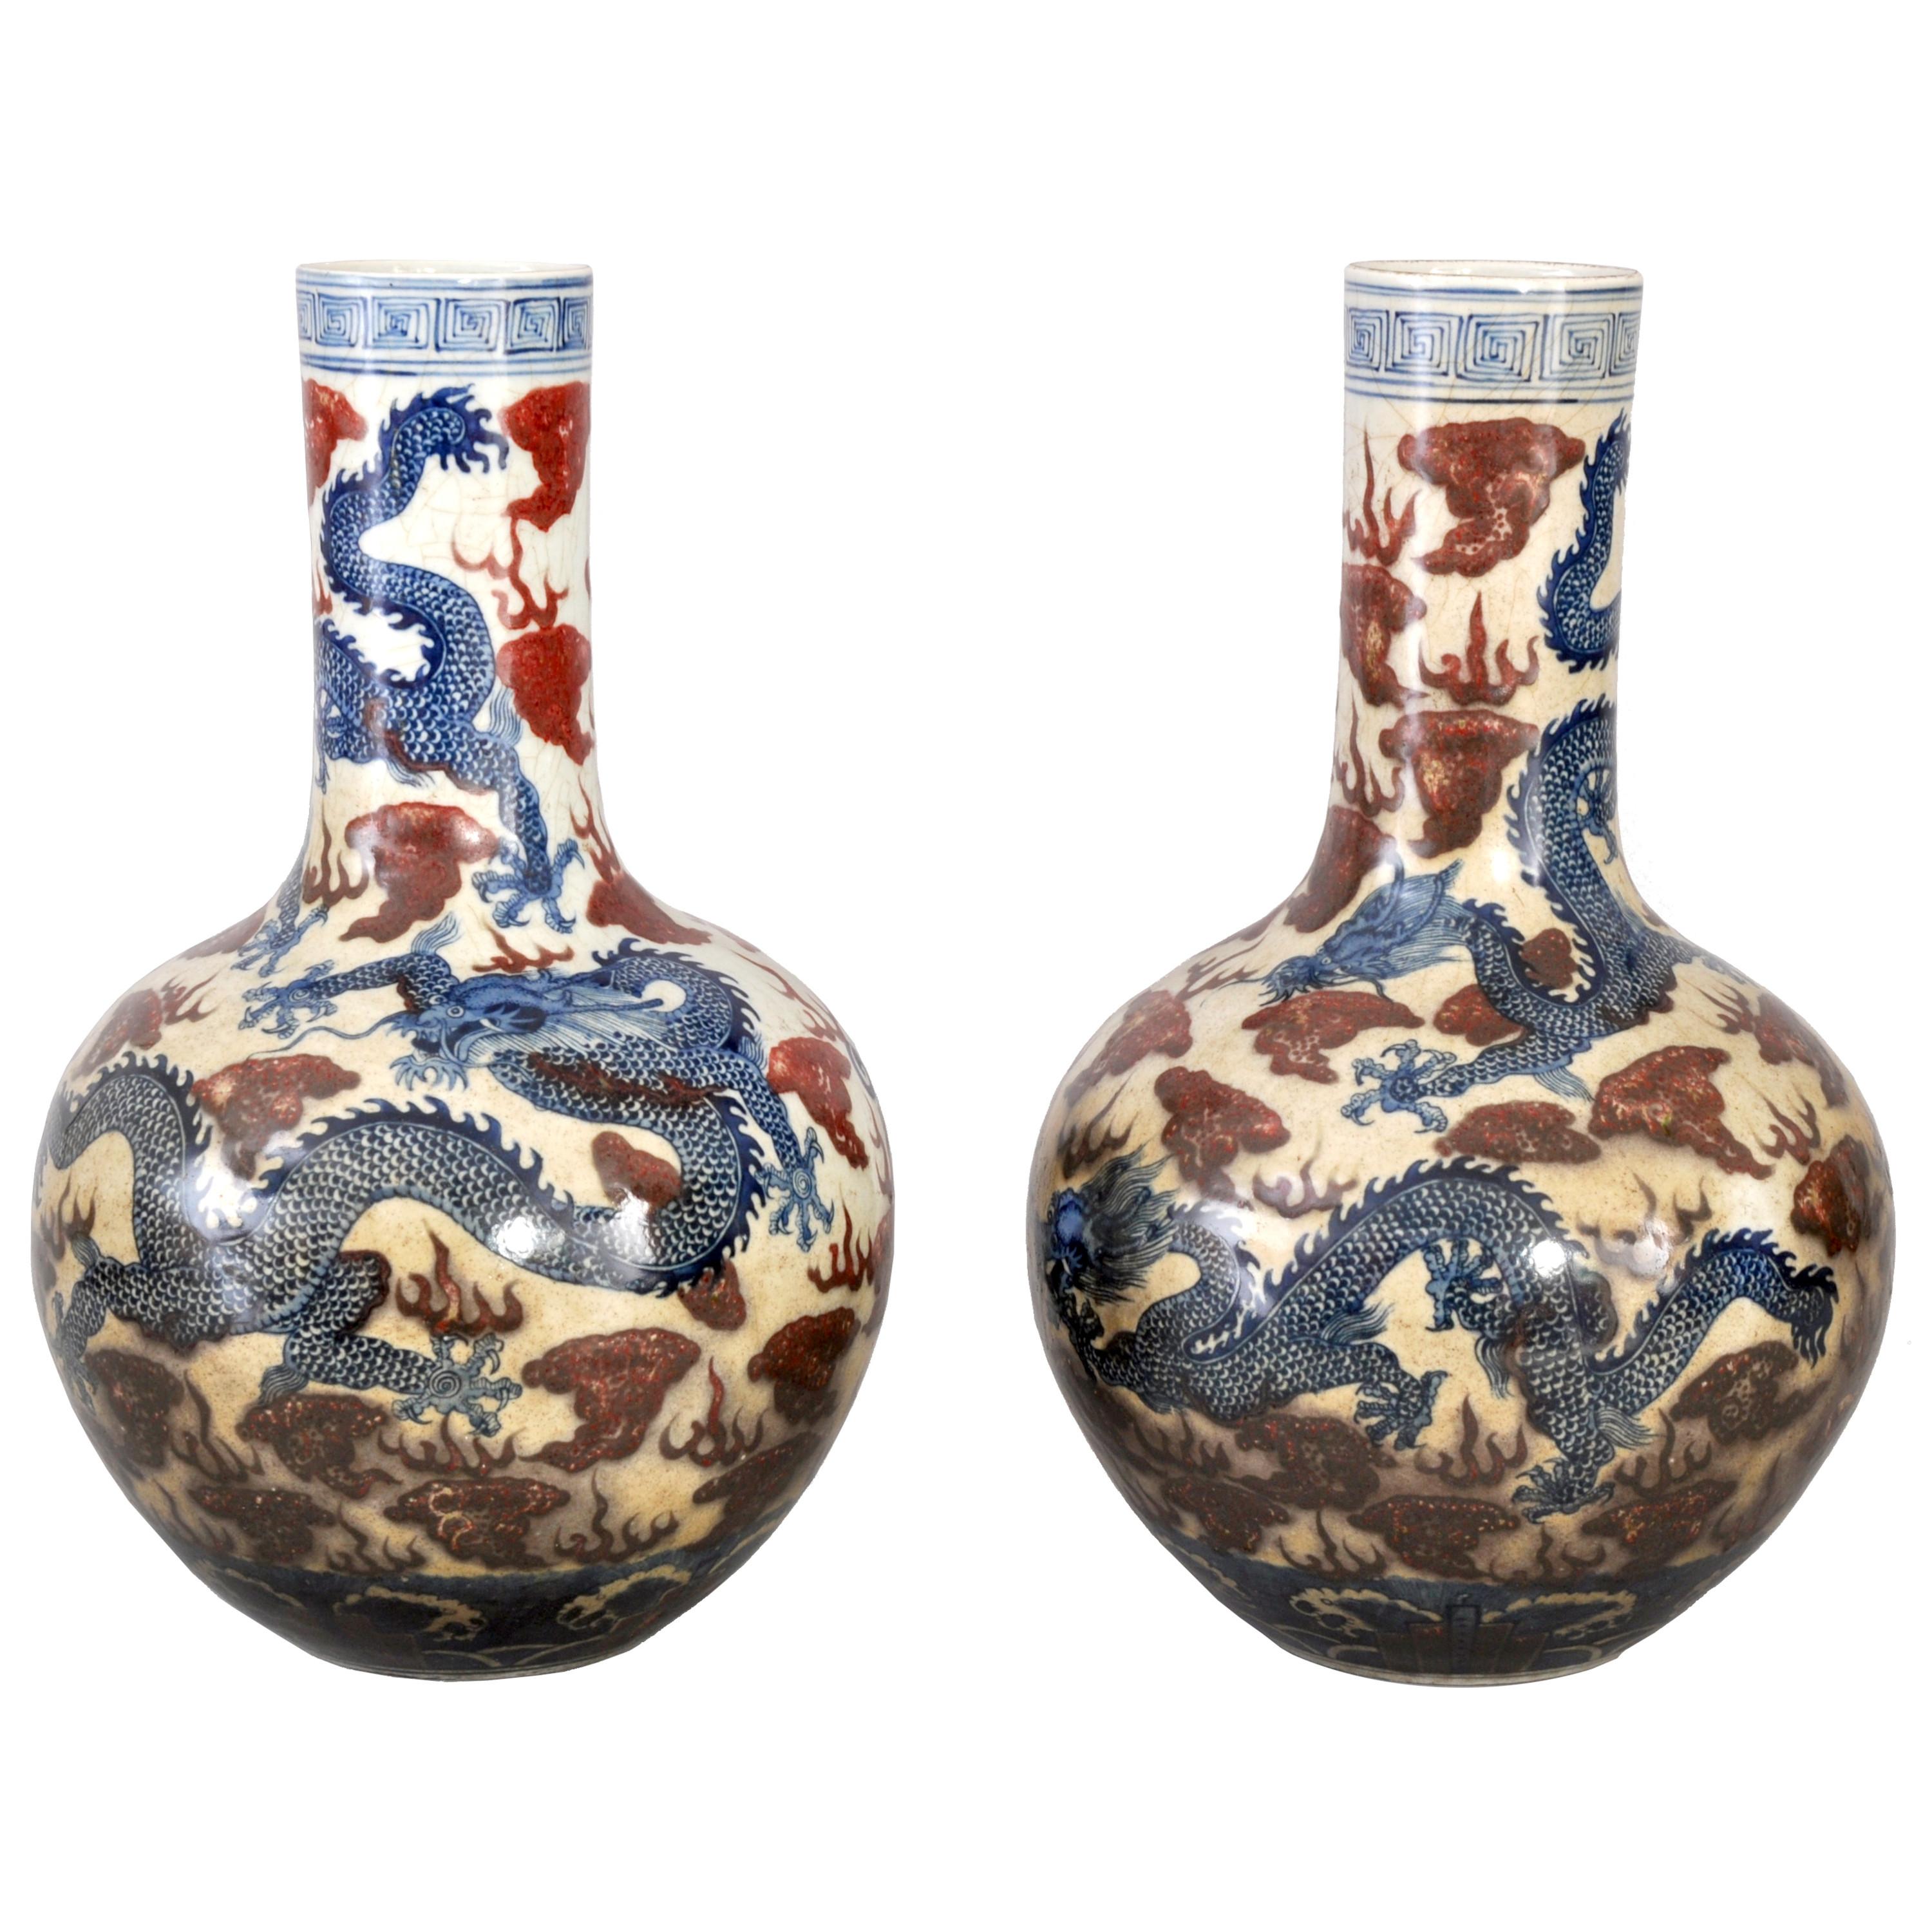 A good pair of large antique Chinese Qing dynasty blue and white dragon vases, circa 1880. Each vase of globular, bottle shaped form and hand painted with blue and red underglaze decoration, the vases are decorated with Imperial five toed dragons in